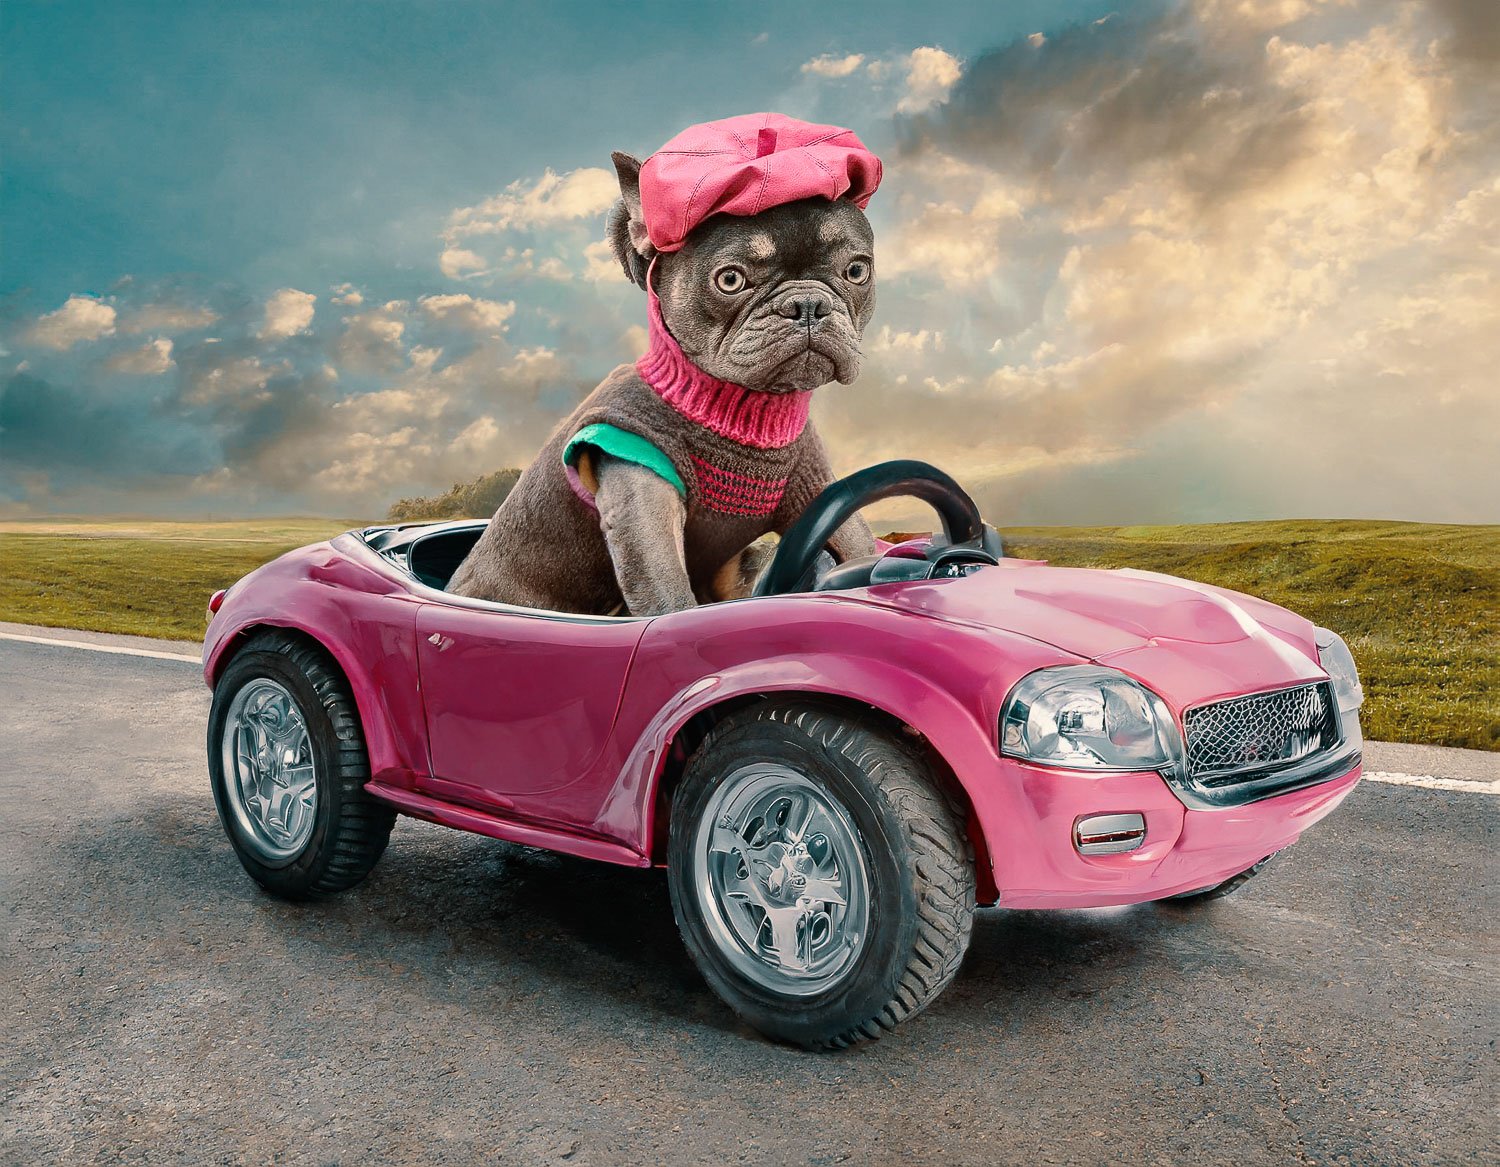  A grey pug dog wearing a pink beret sitting in a pink sports car